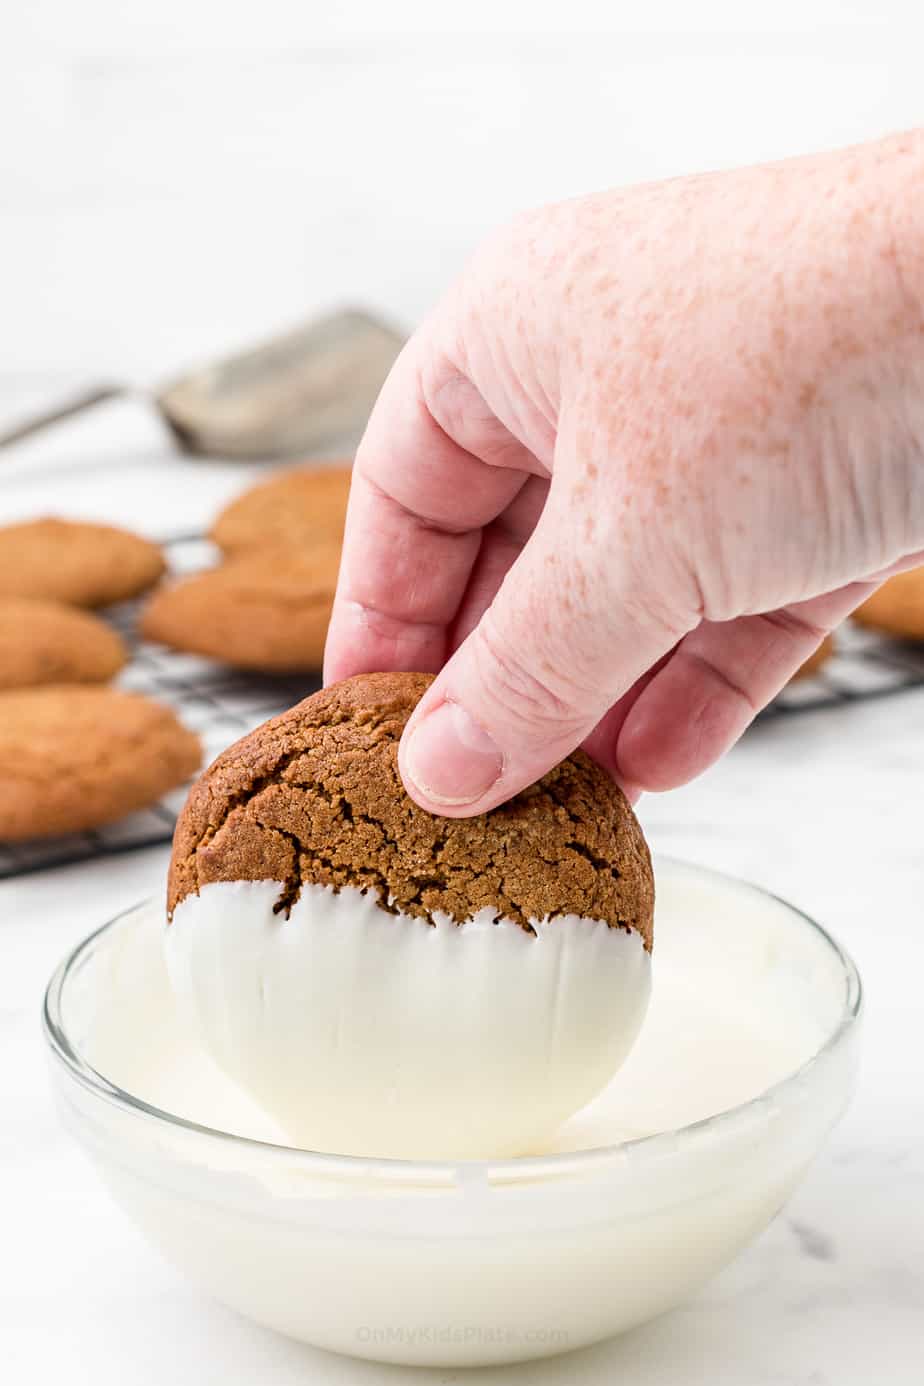 Hand dipping a molasses cookie in white chocolate from the side